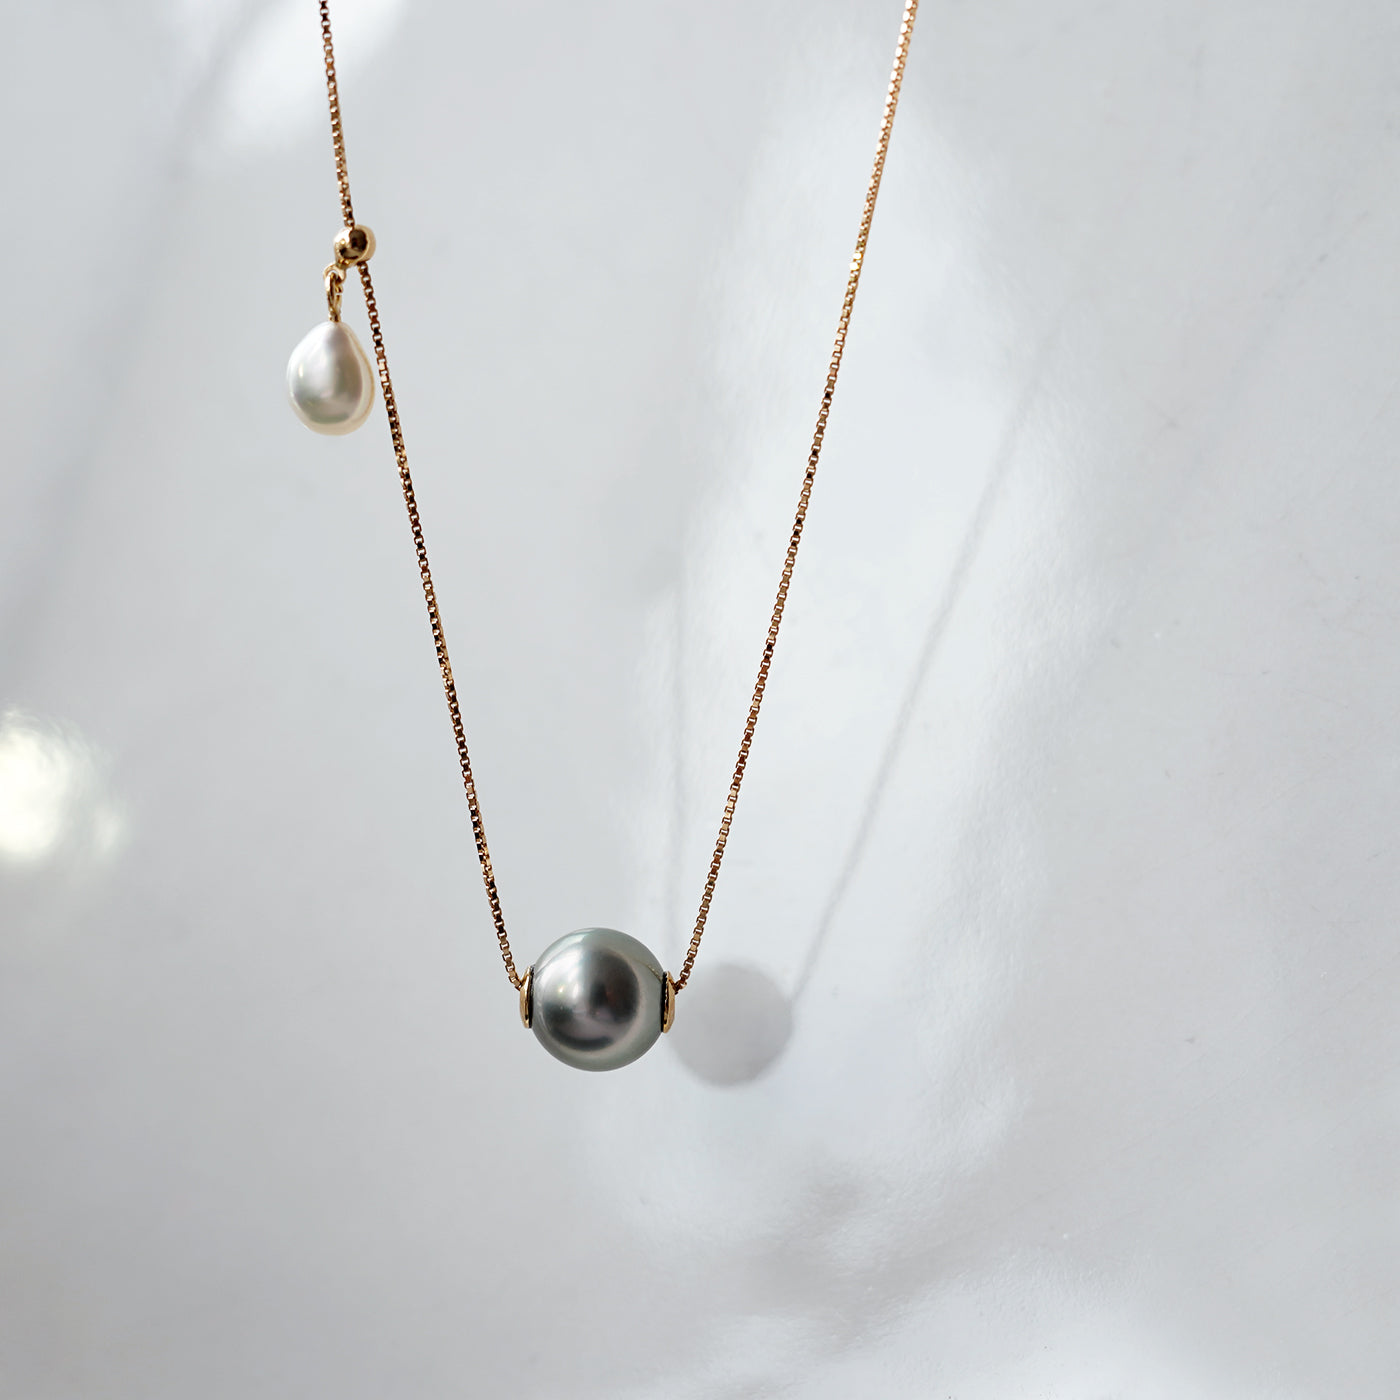 Wandering Pearl Chain Necklace - 黒蝶パール & アコヤケシ